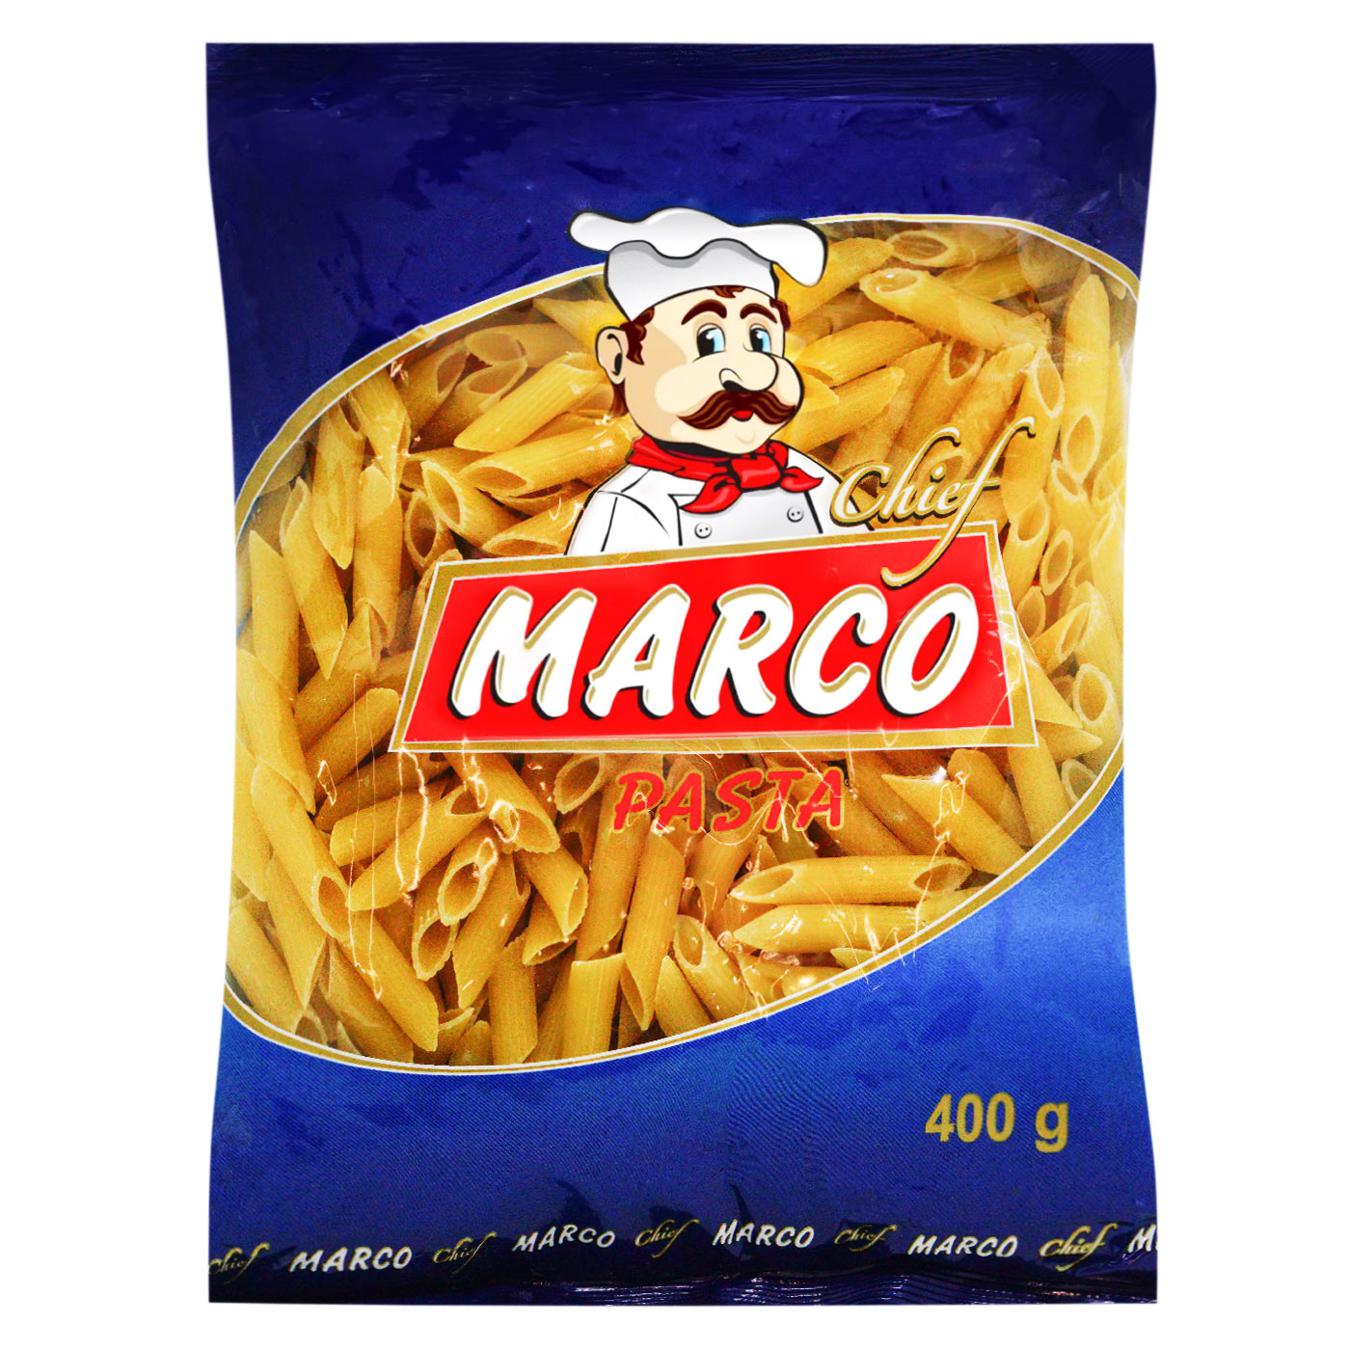 Marco penne pasta 400g